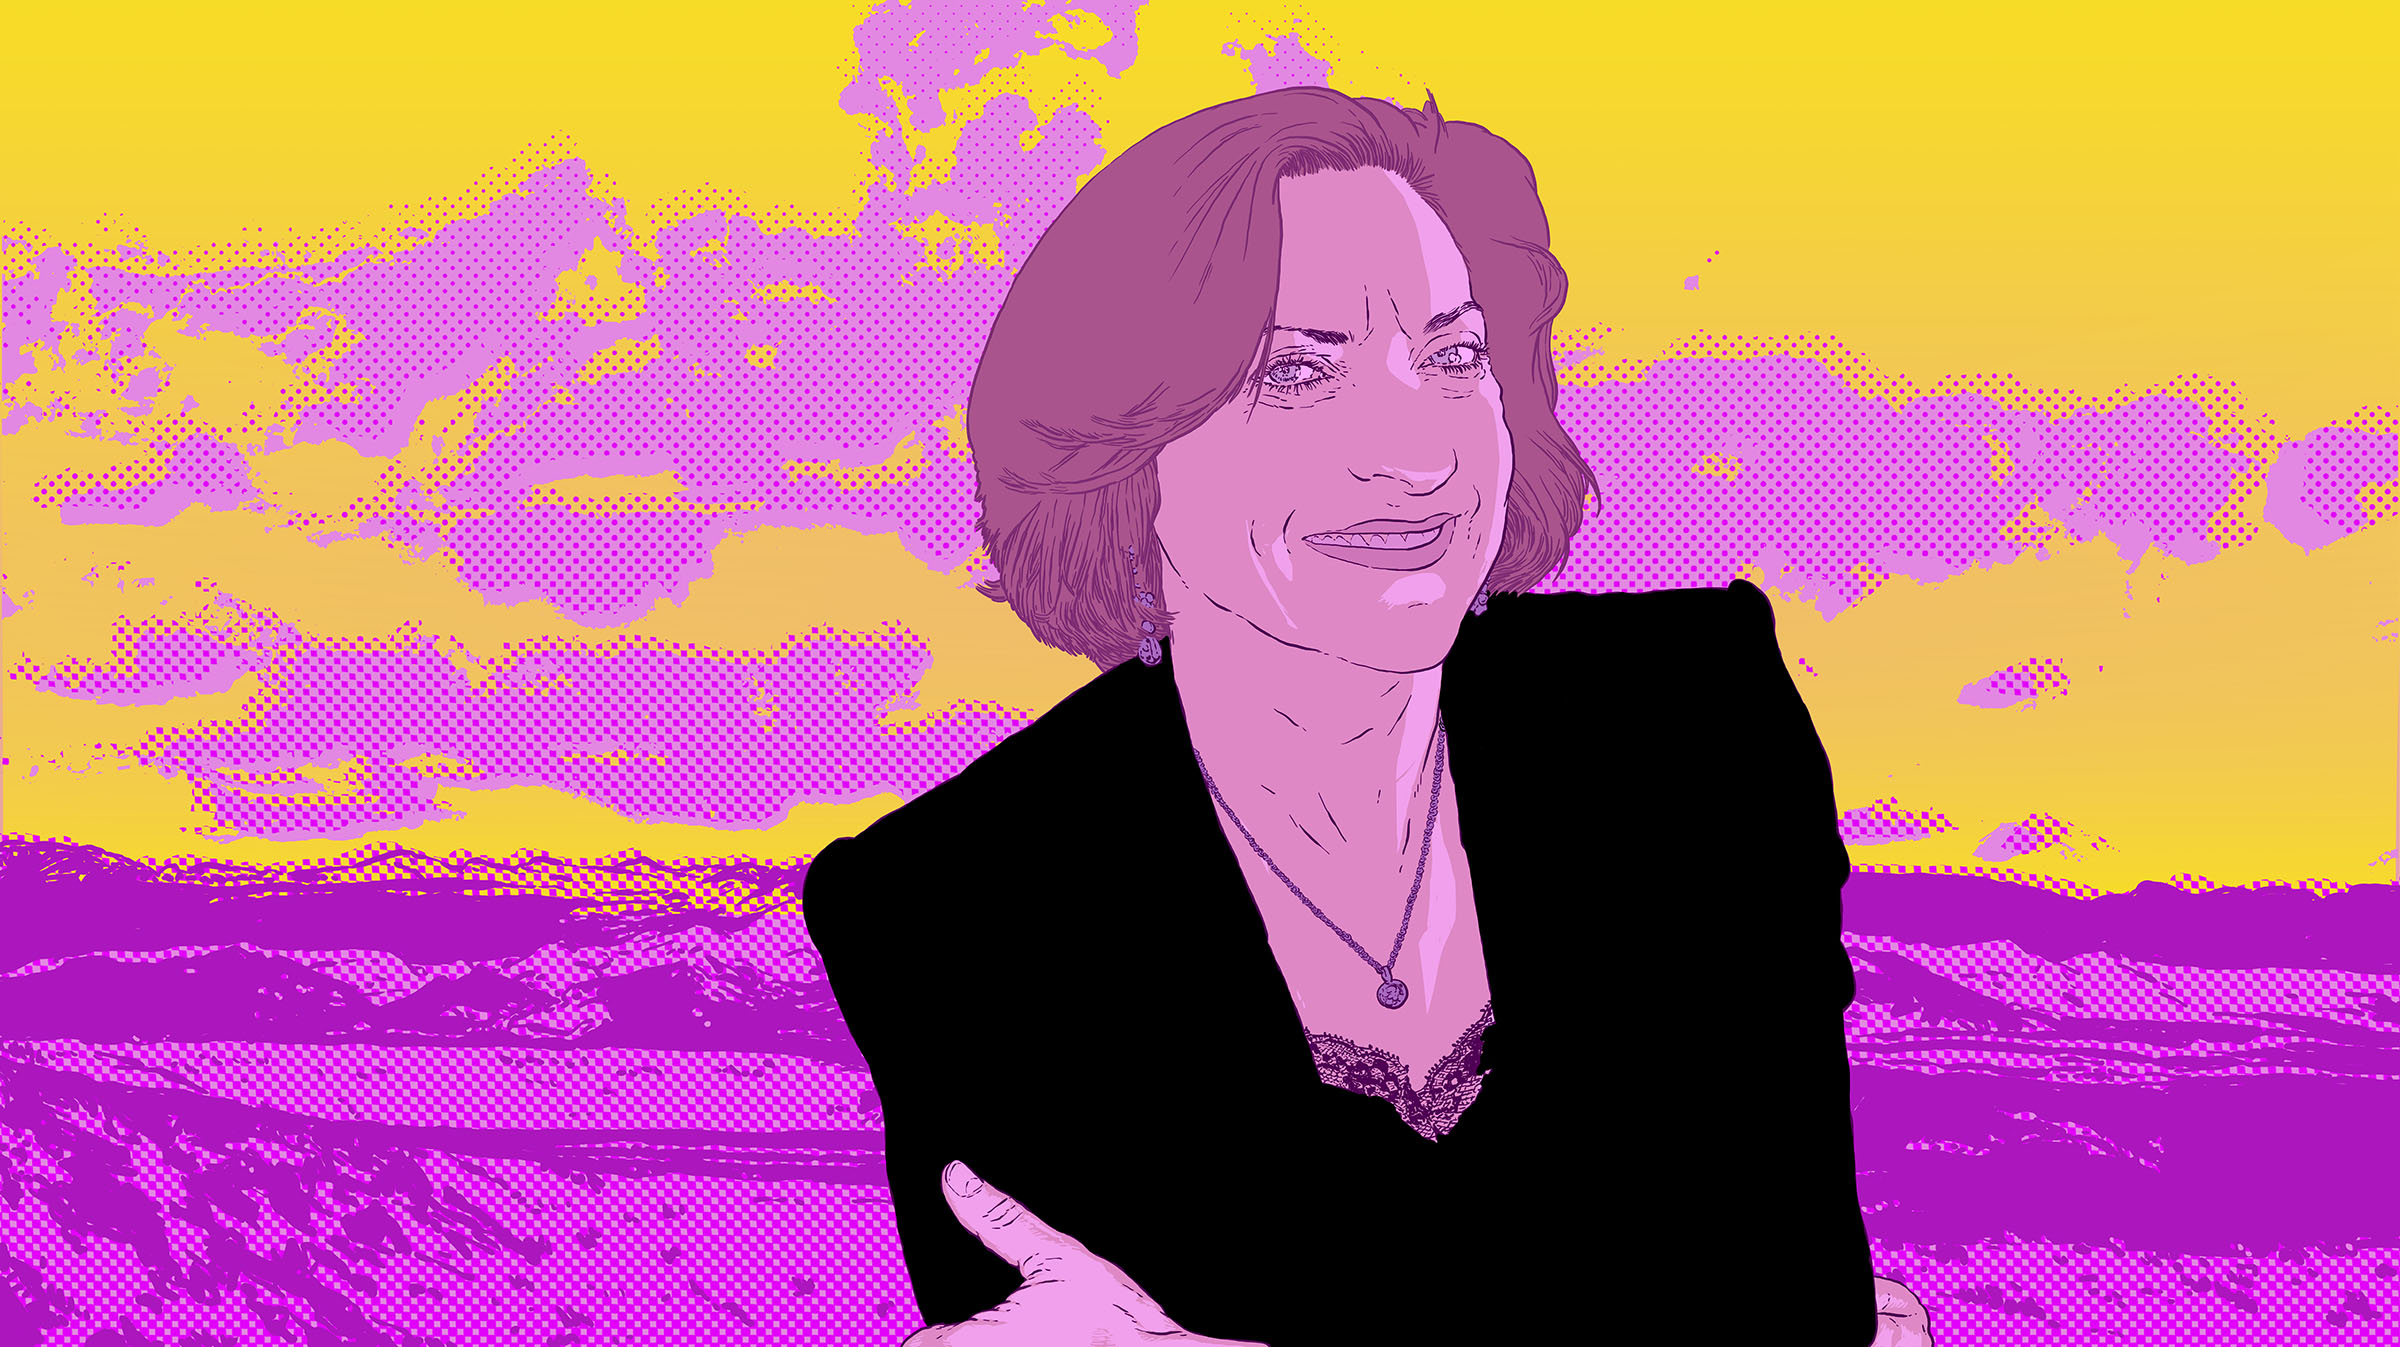 A brightly-colored illustration of a woman wearing a dark blazer